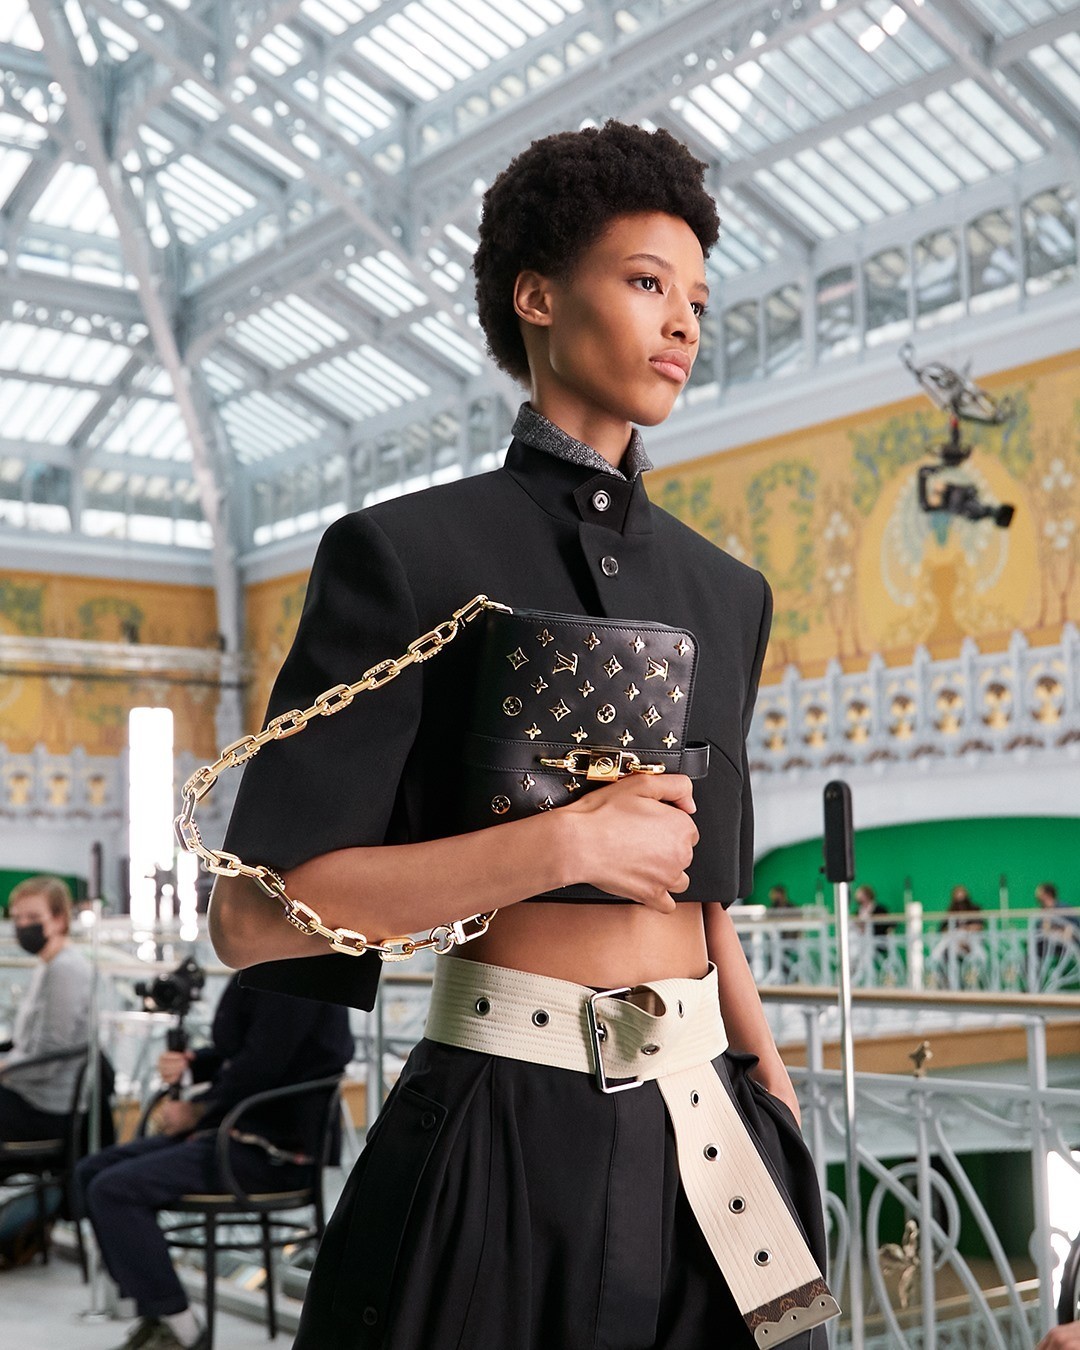 Louis Vuitton - #LVSS21
Shifting contours. Detail of a look and new bag from @NicolasGhesquiere’s latest #LouisVuitton Collection. Watch the Fashion Show at louisvuitton.com